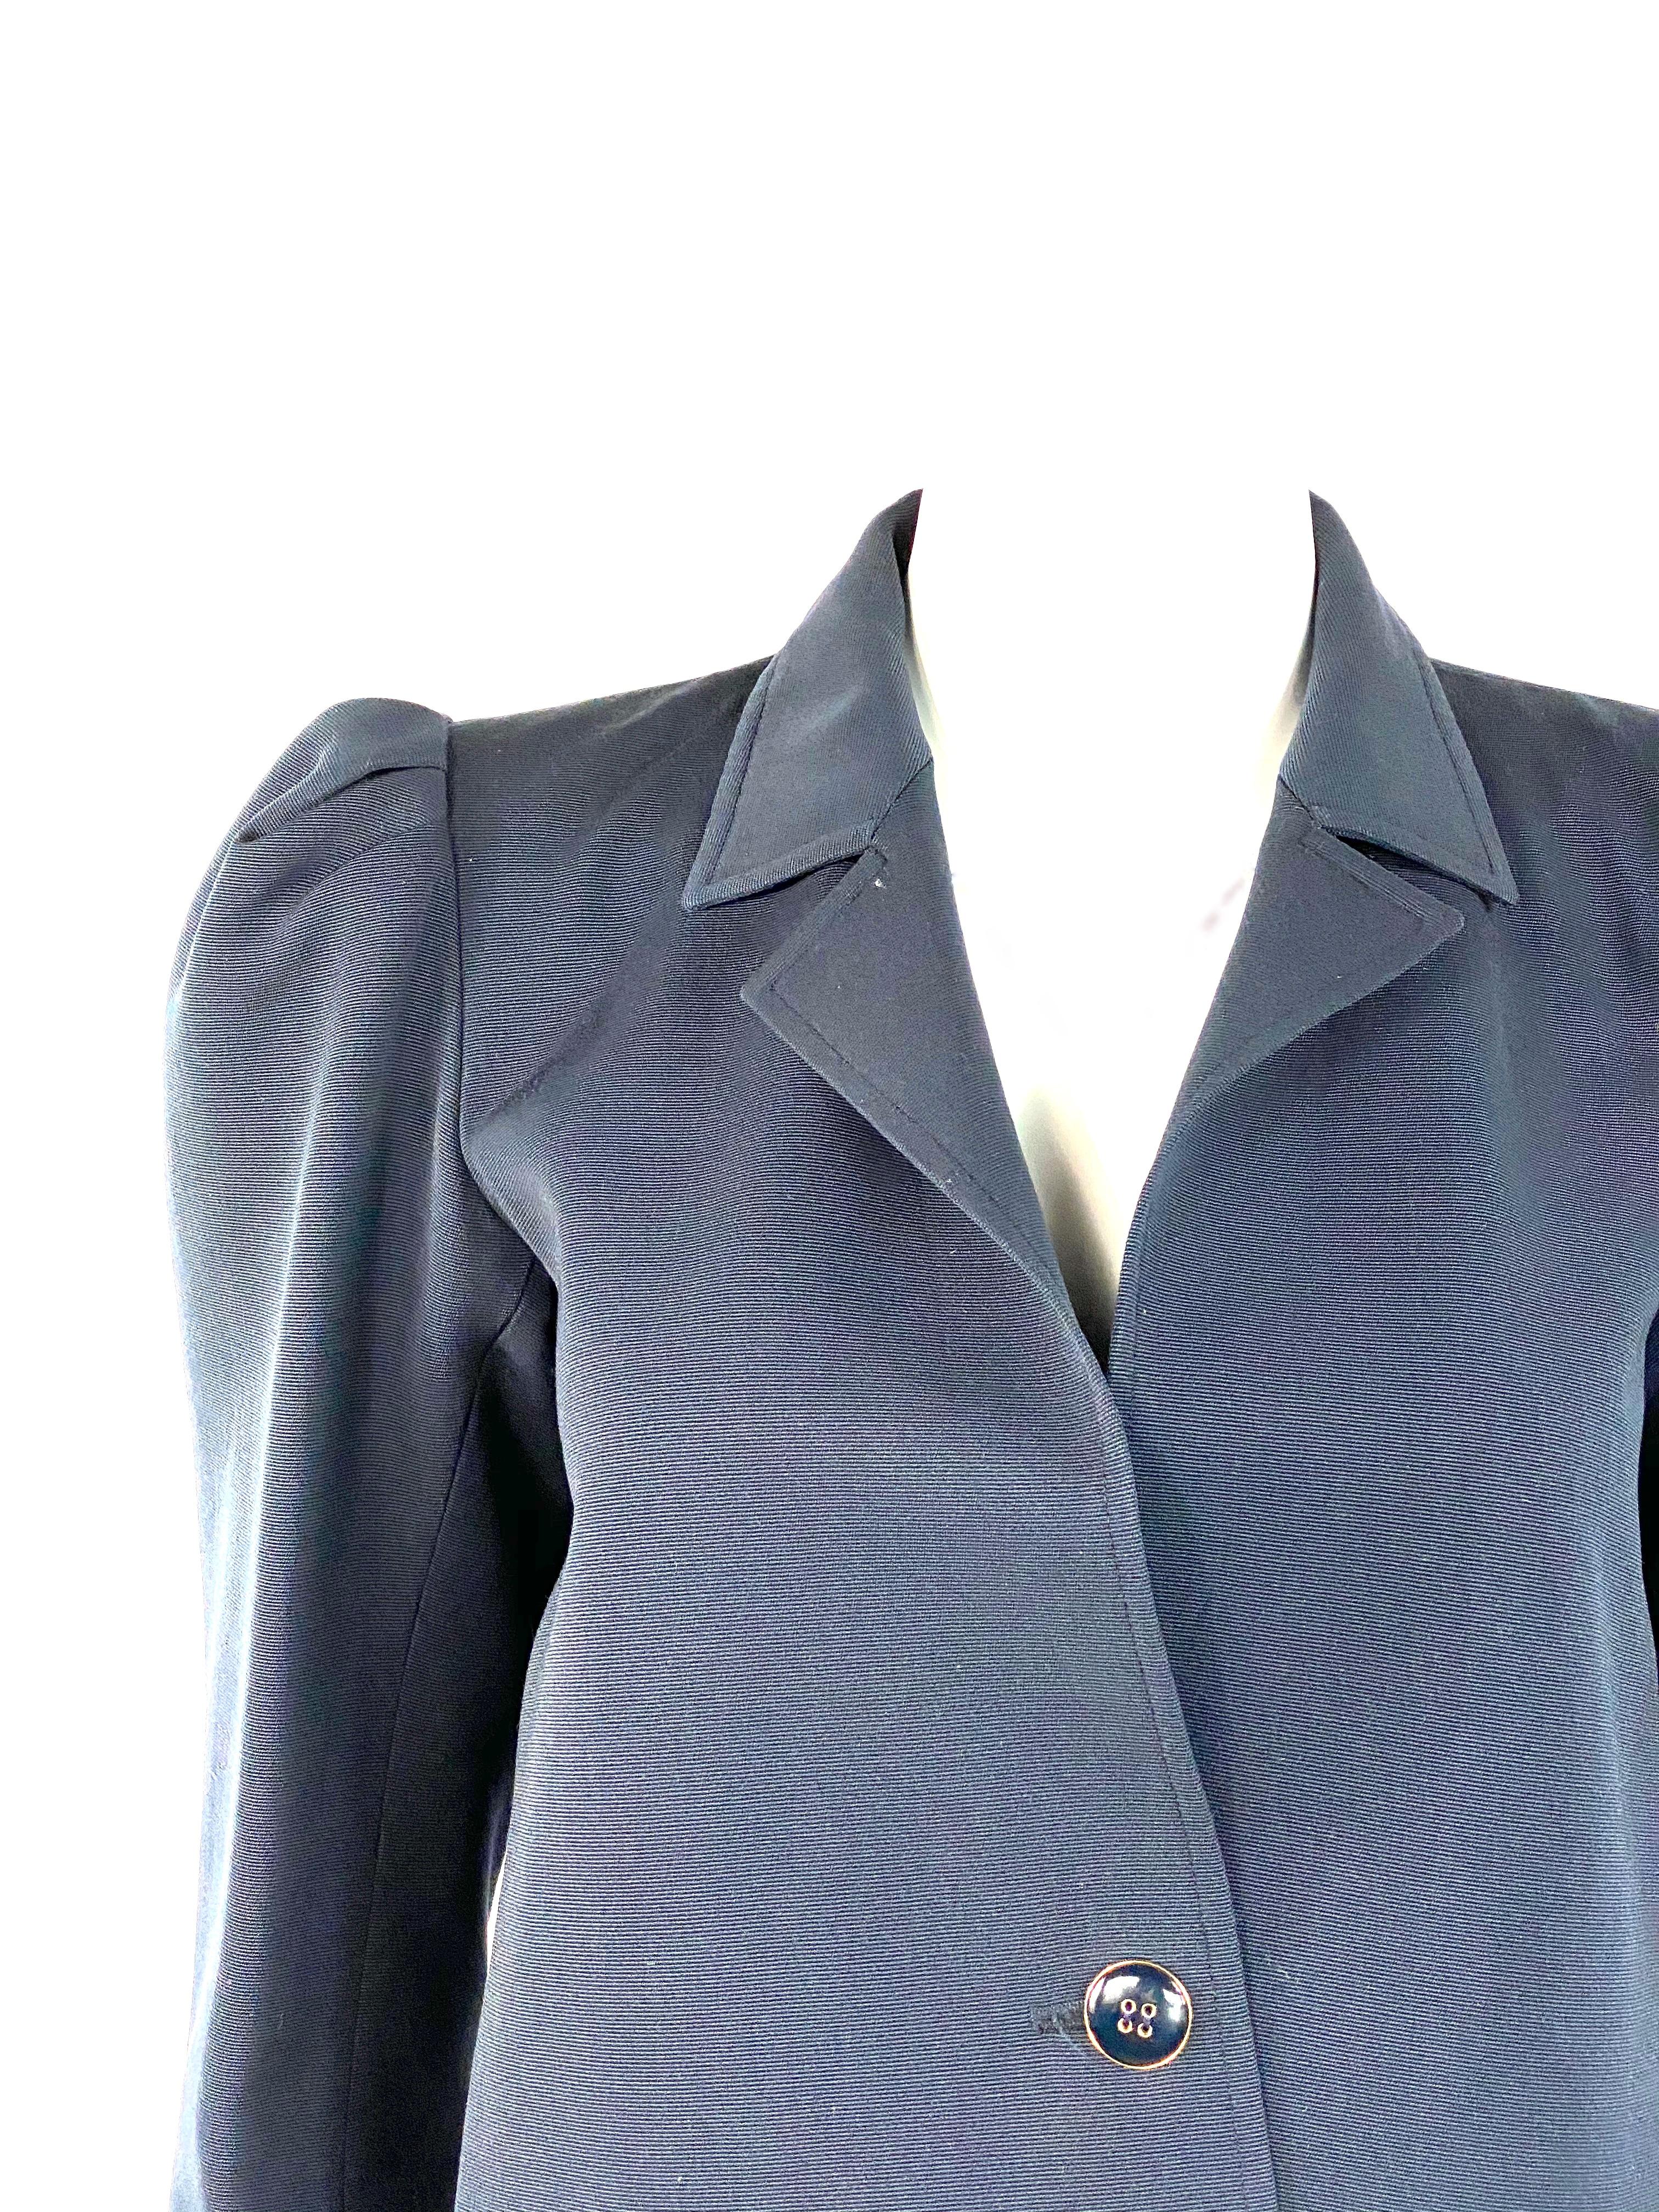 Vintage YSL Yves Saint Laurent Rive Gauche Navy Blazer Tuxedo Jacket Size 38

Product details:
Size FR 38
Featuring front navy and gold one button closure
Puffy shoulder detail
One navy and gold button on the bottom of each sleeve
Folded sleeves